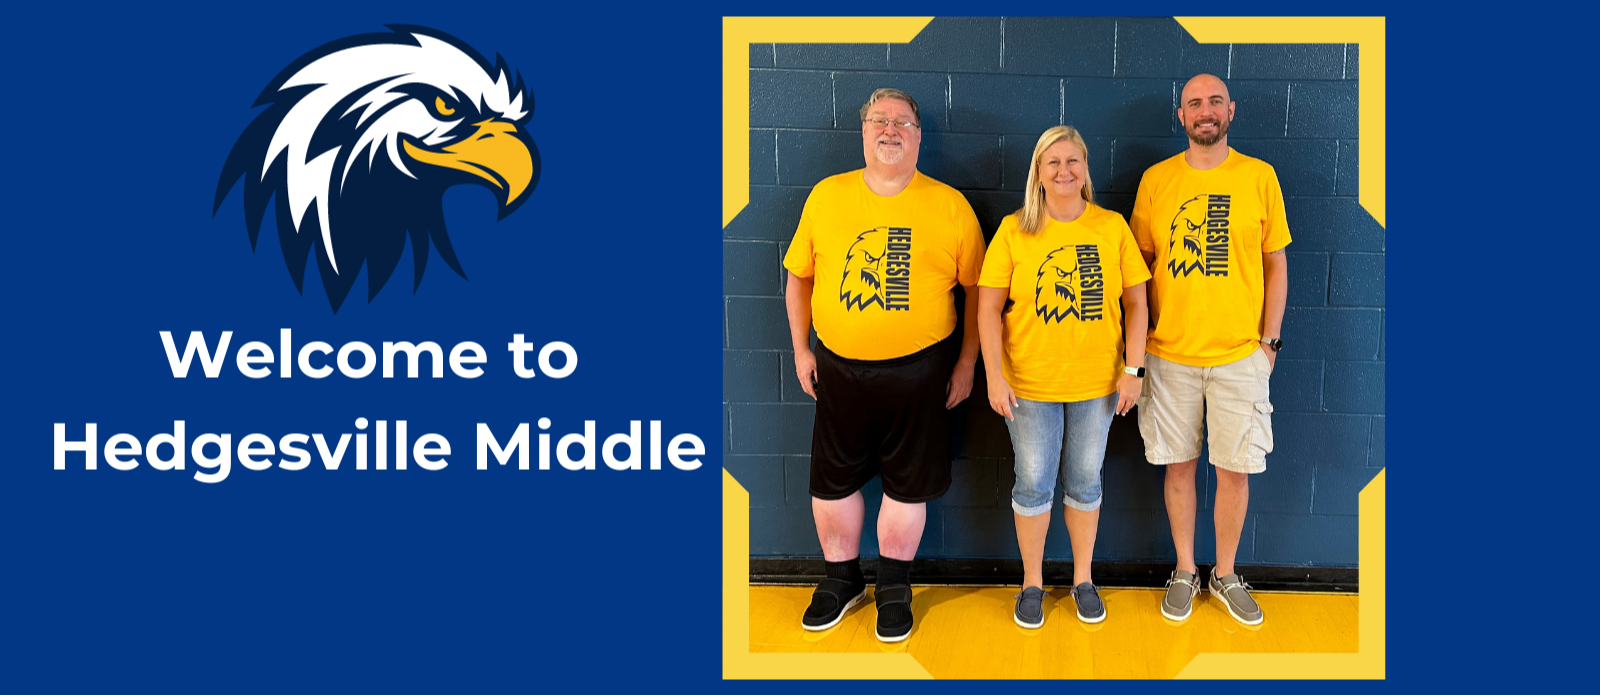 Welcome to Hedesville Middle - Admin in yellow HMS shirts